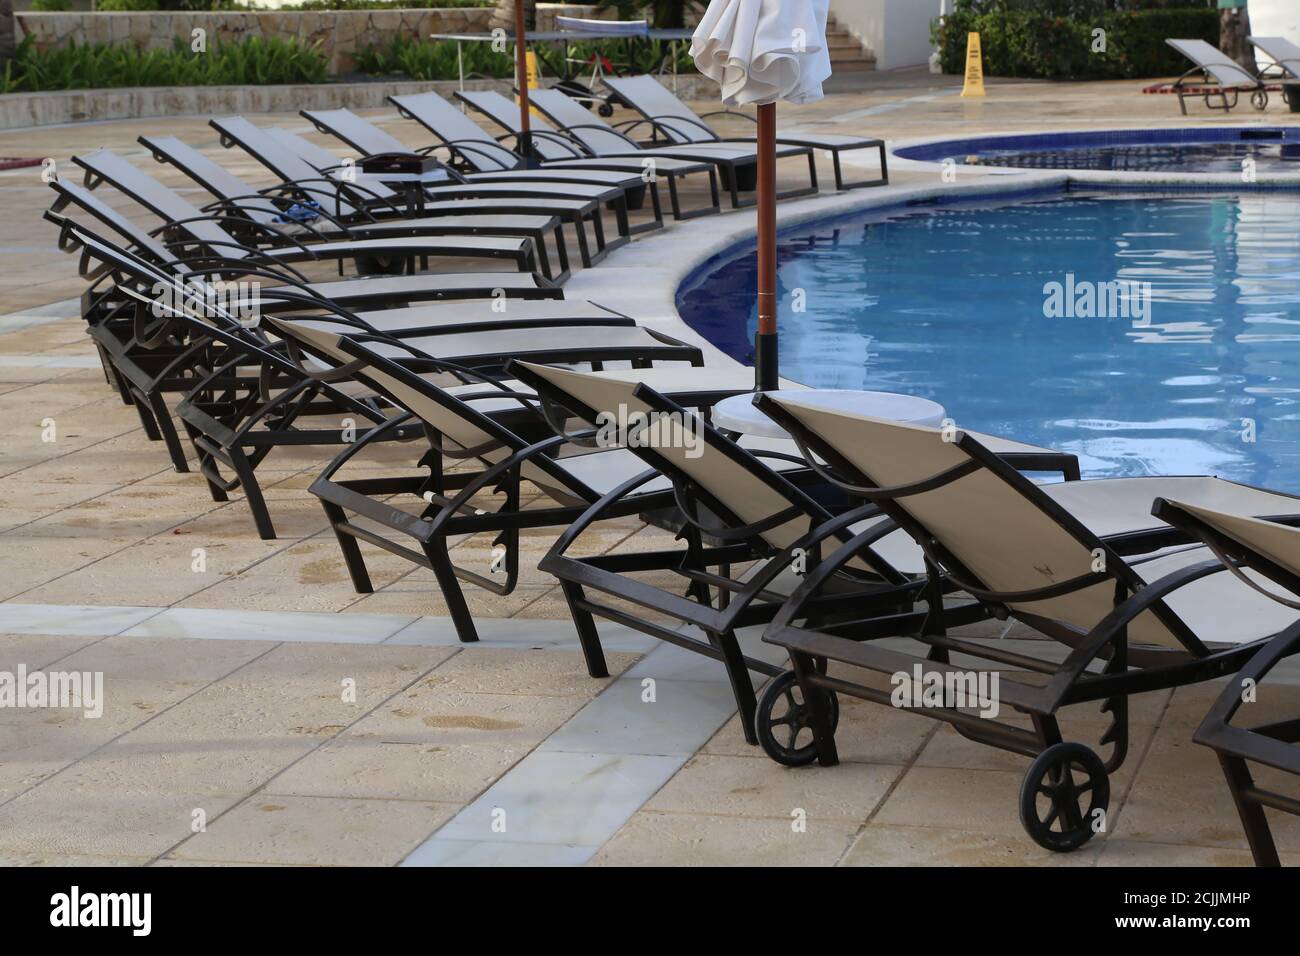 Pool surrounded by folding chairs Stock Photo